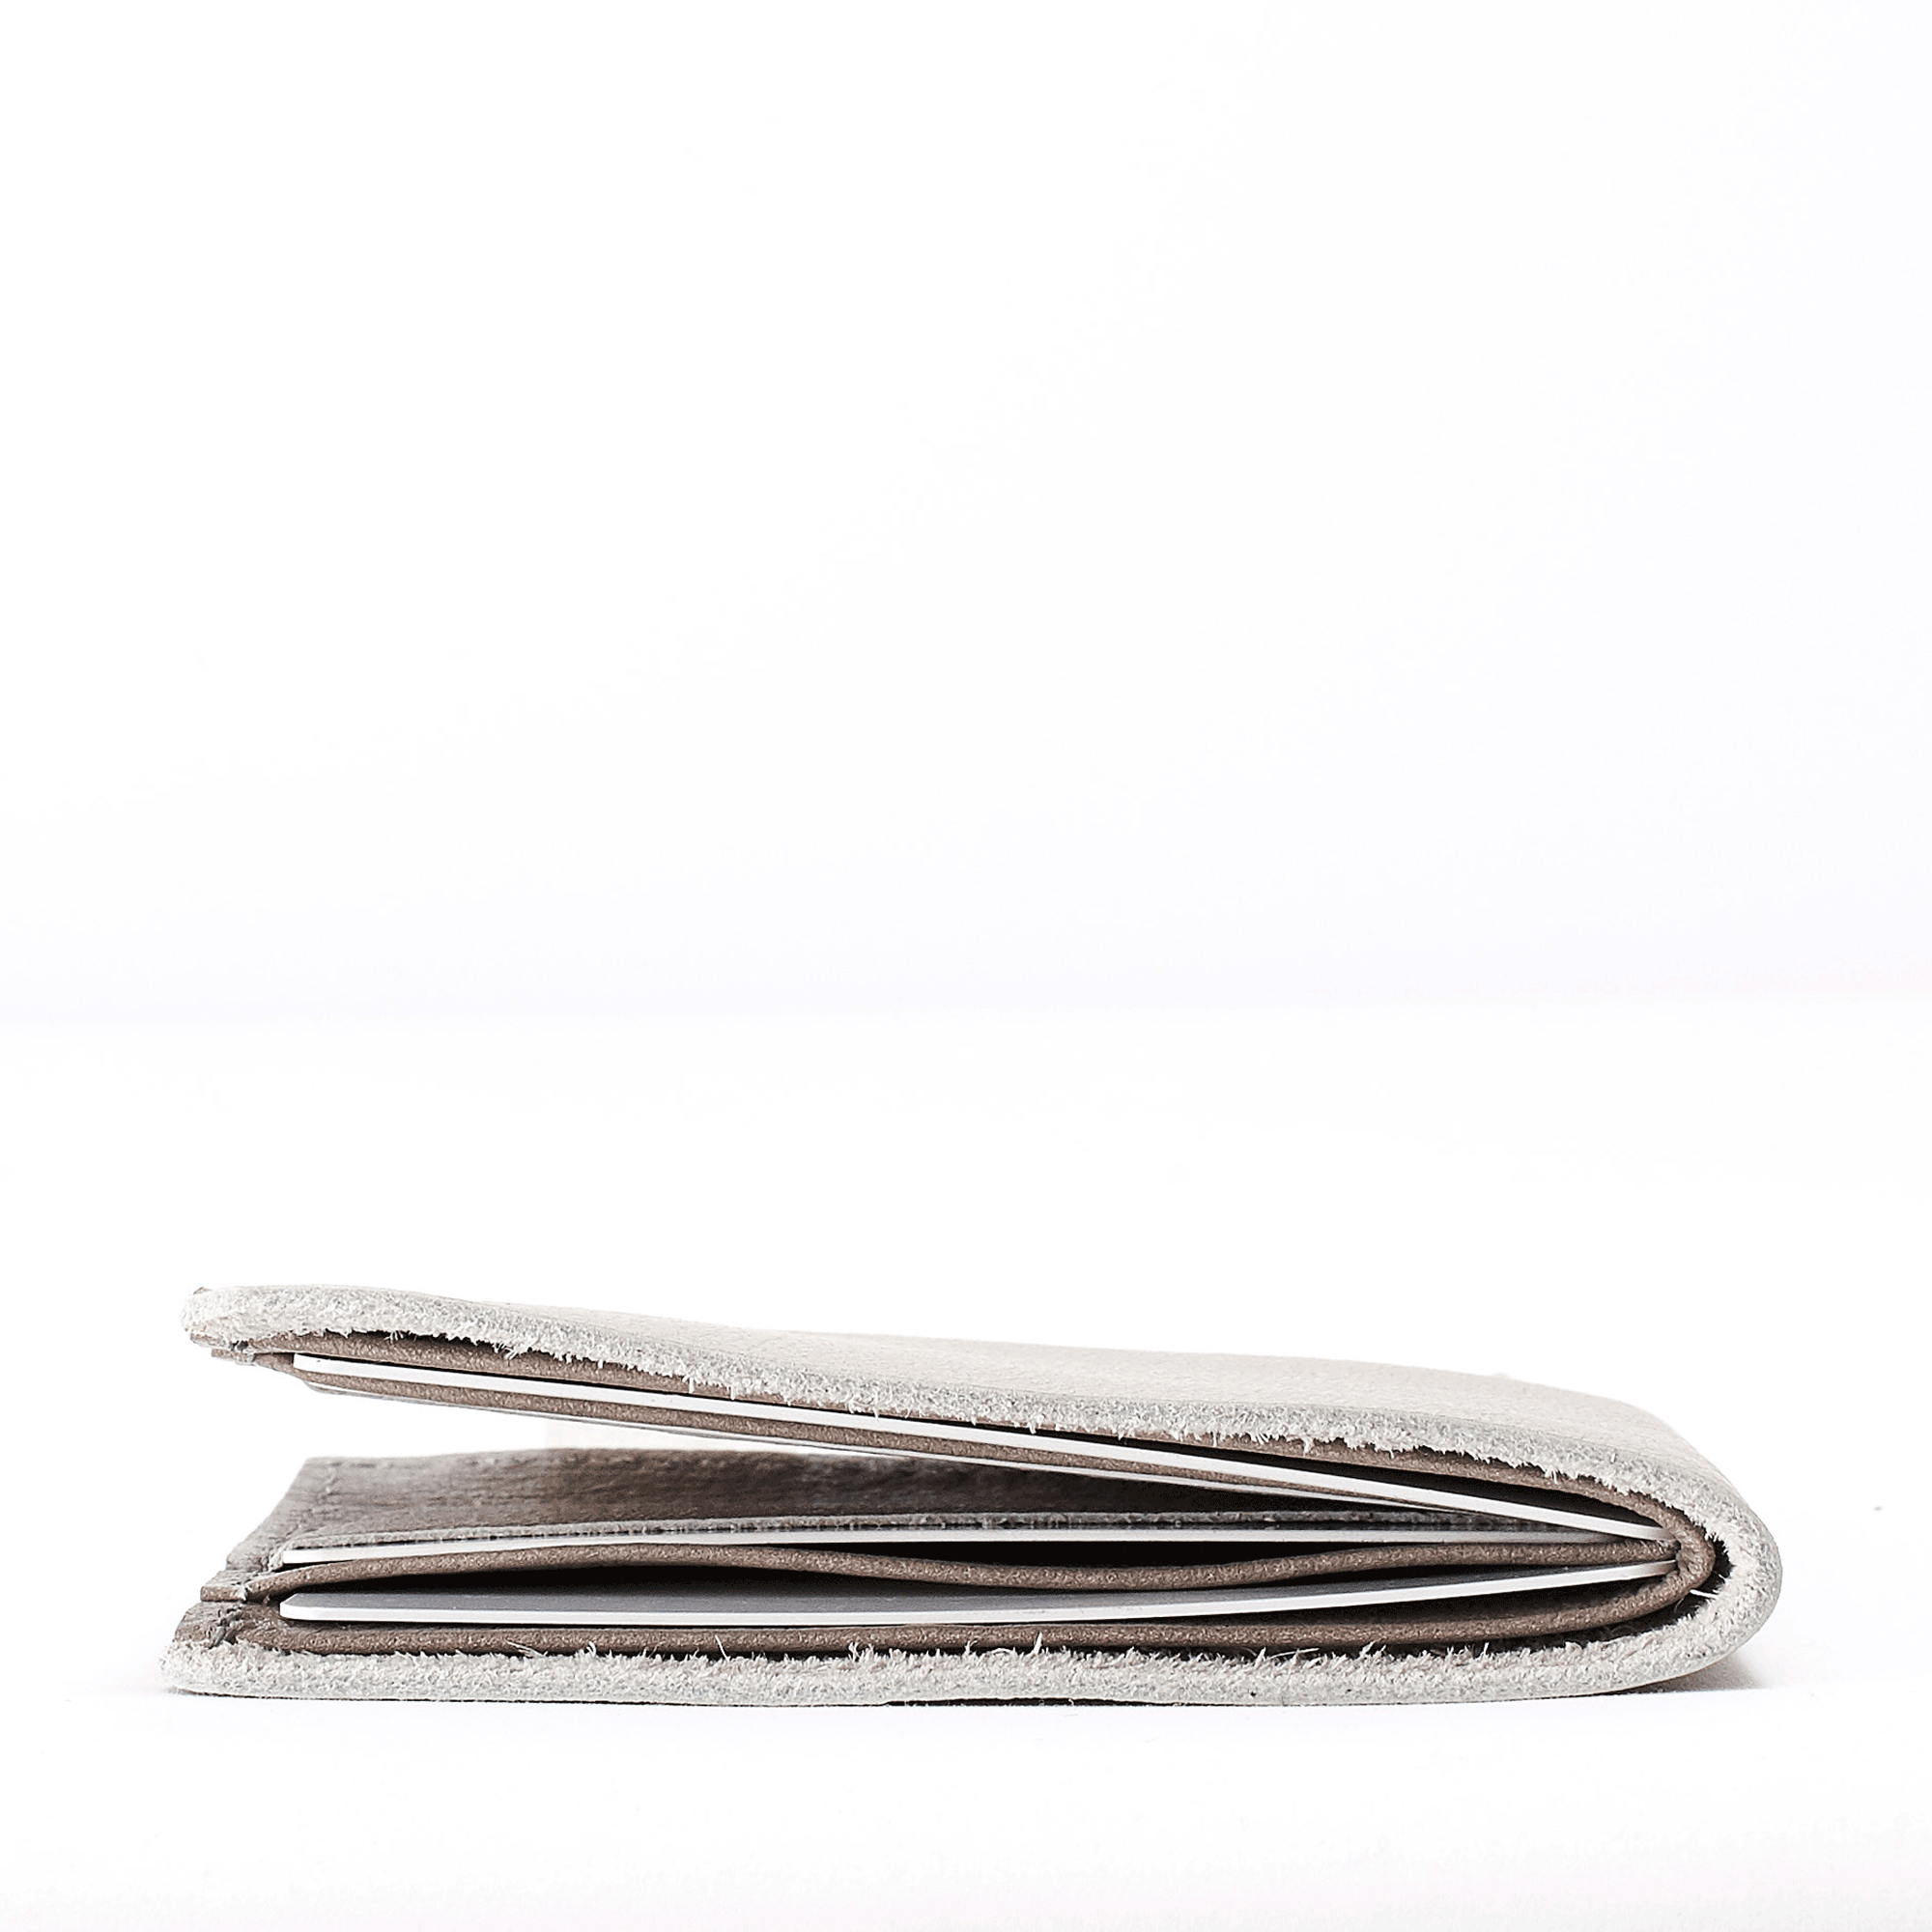 Slim profile. Grey leather slim wallet, gifts for men, handmade accessories, minimalist full grain leather thin wallet